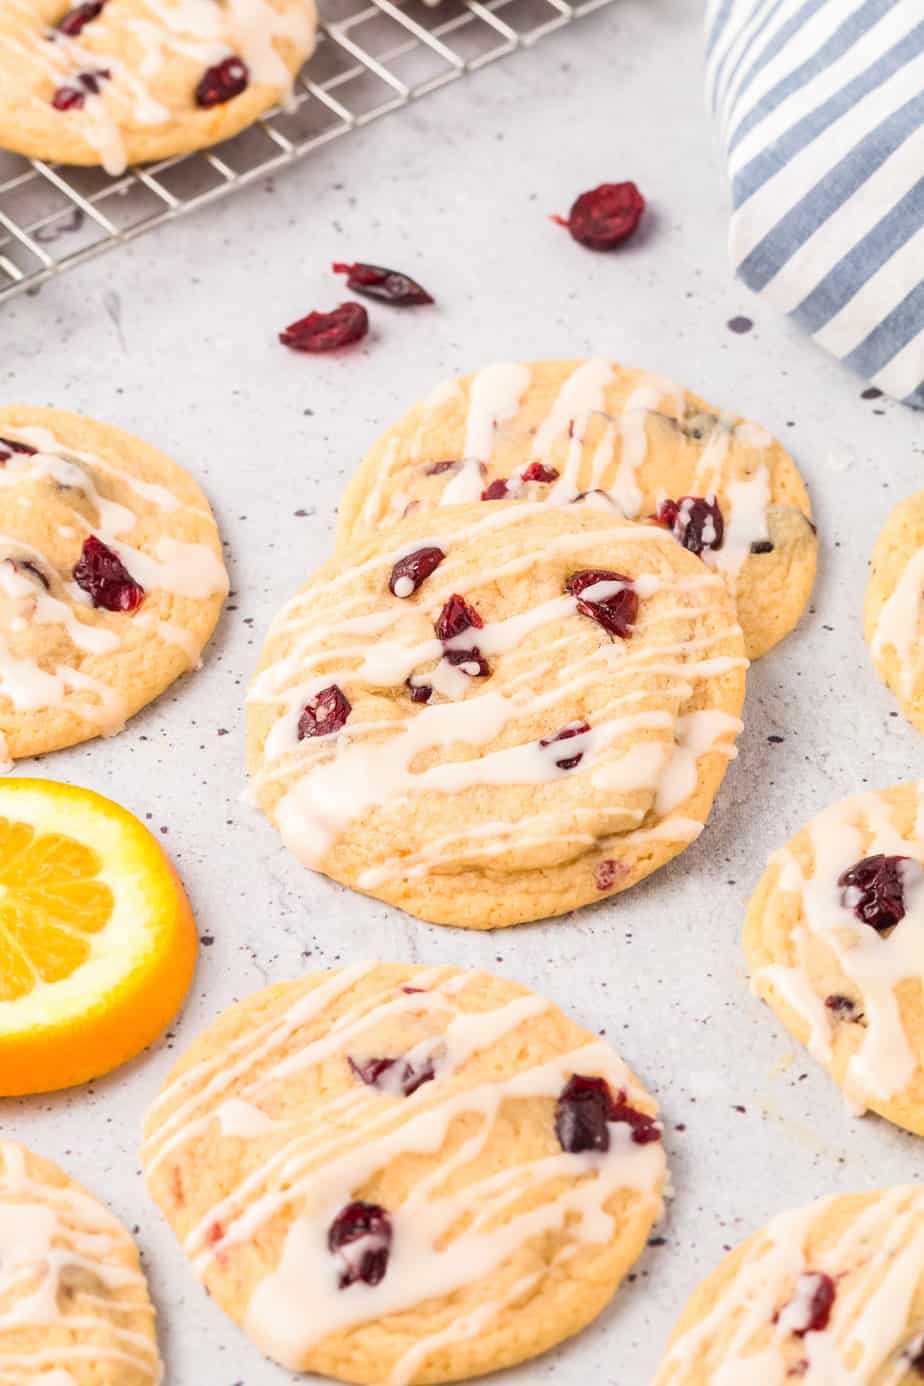 Glazed cranberry cookies piled on a counter with more cranberries and slices of orange nearby from the side.